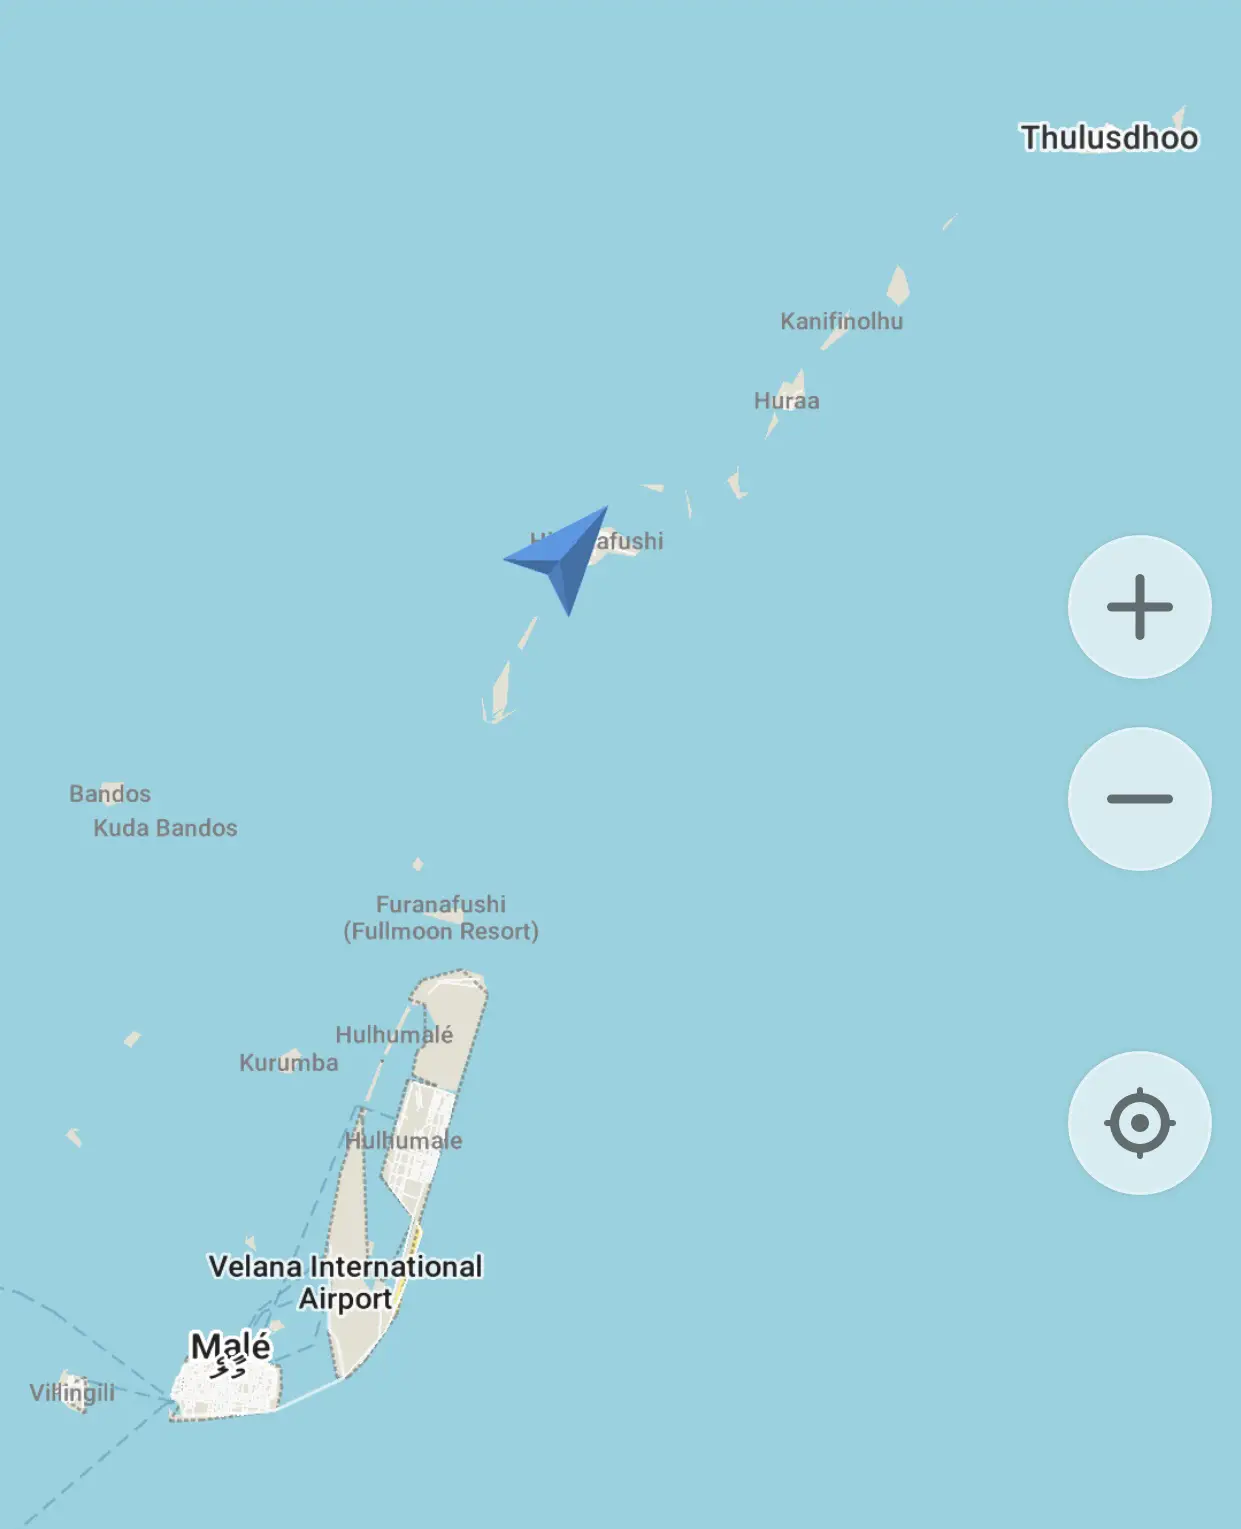 Map of route to Thulusdhoo Island in the Maldives 